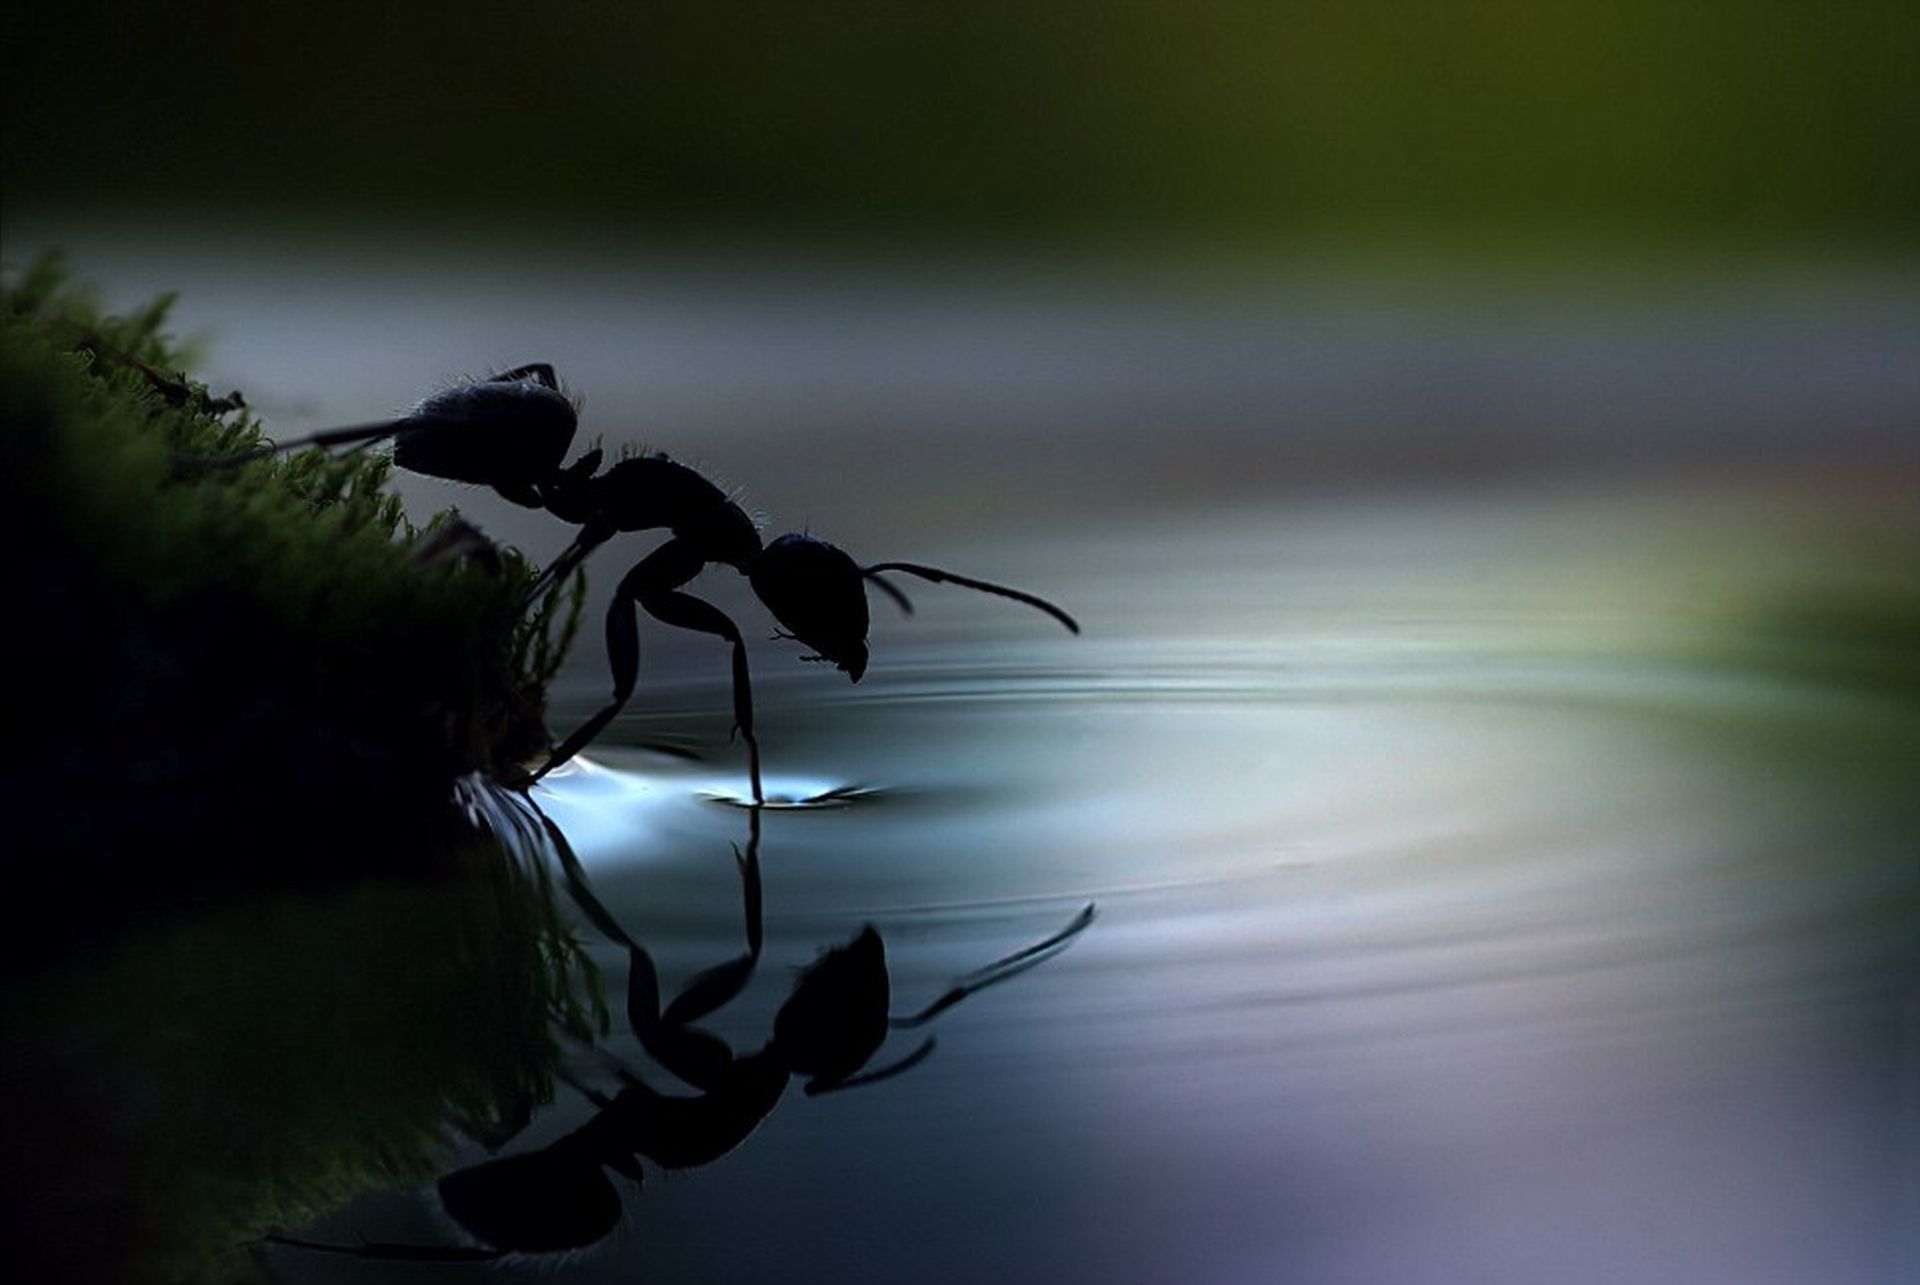 Water insects ants ripples reflections wallpaper. Insect photography, Wildlife picture, Macro photo